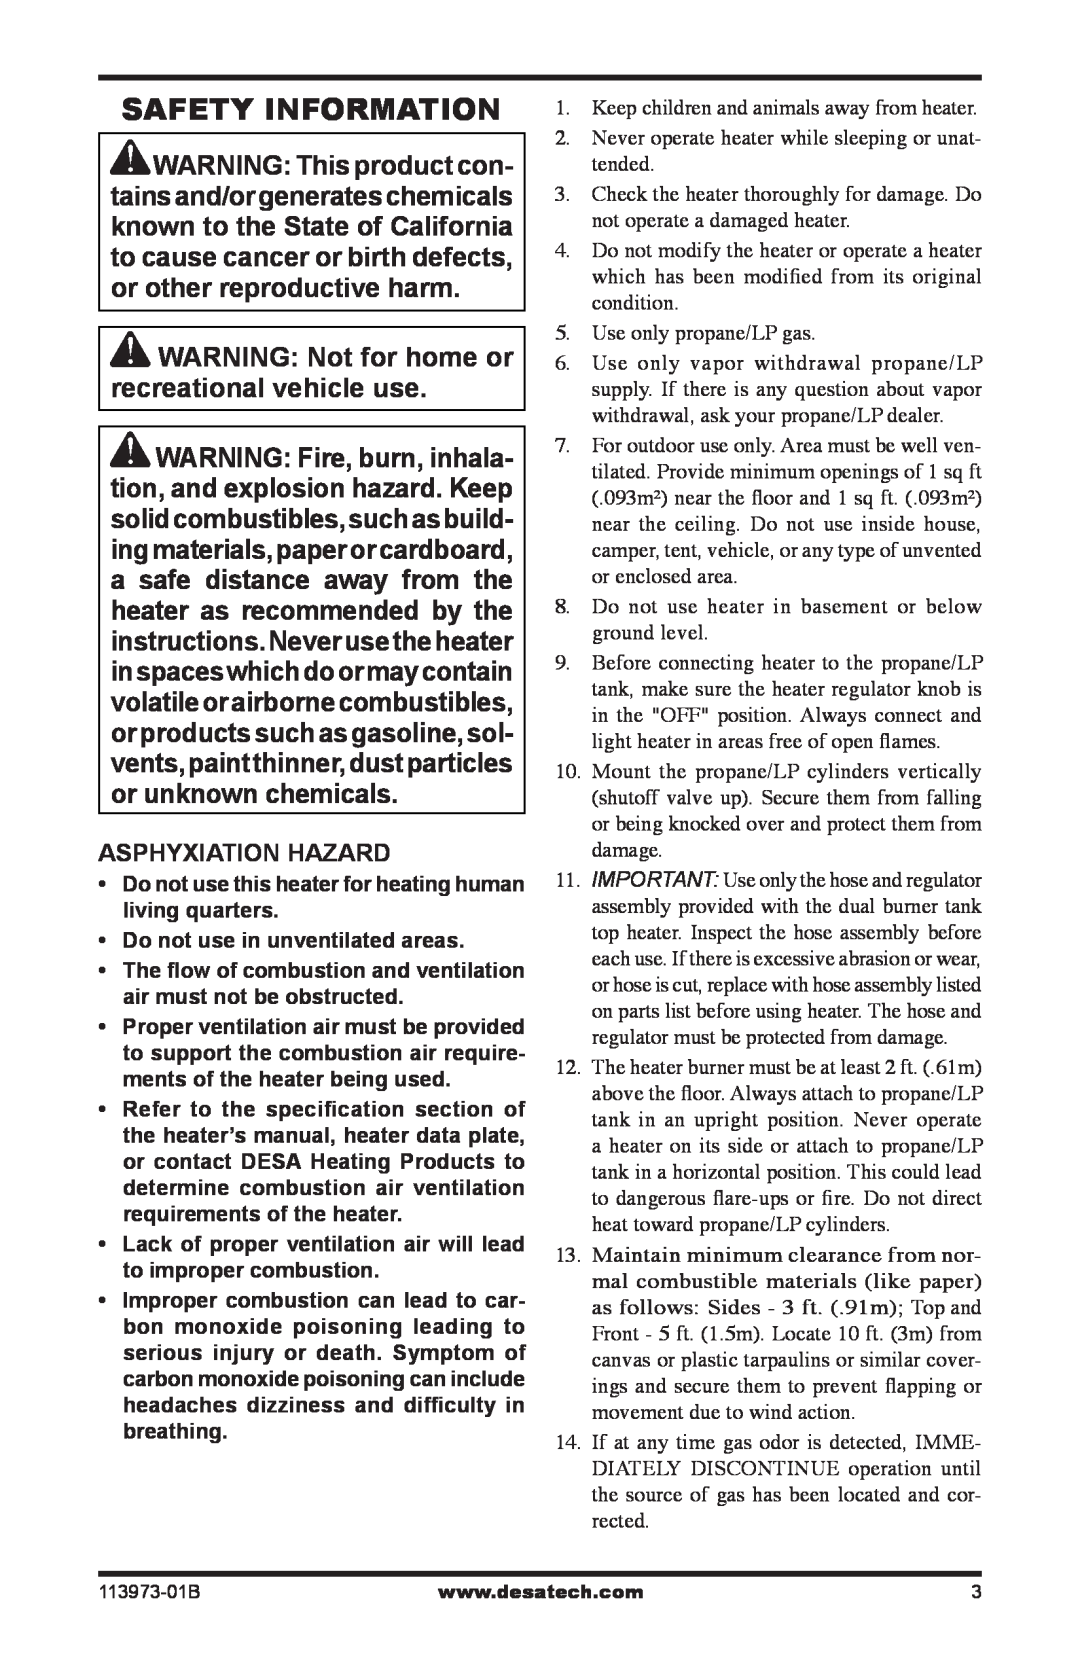 Desa AND TT30 10 owner manual Safety Information, WARNING Not for home or recreational vehicle use, Asphyxiation Hazard 